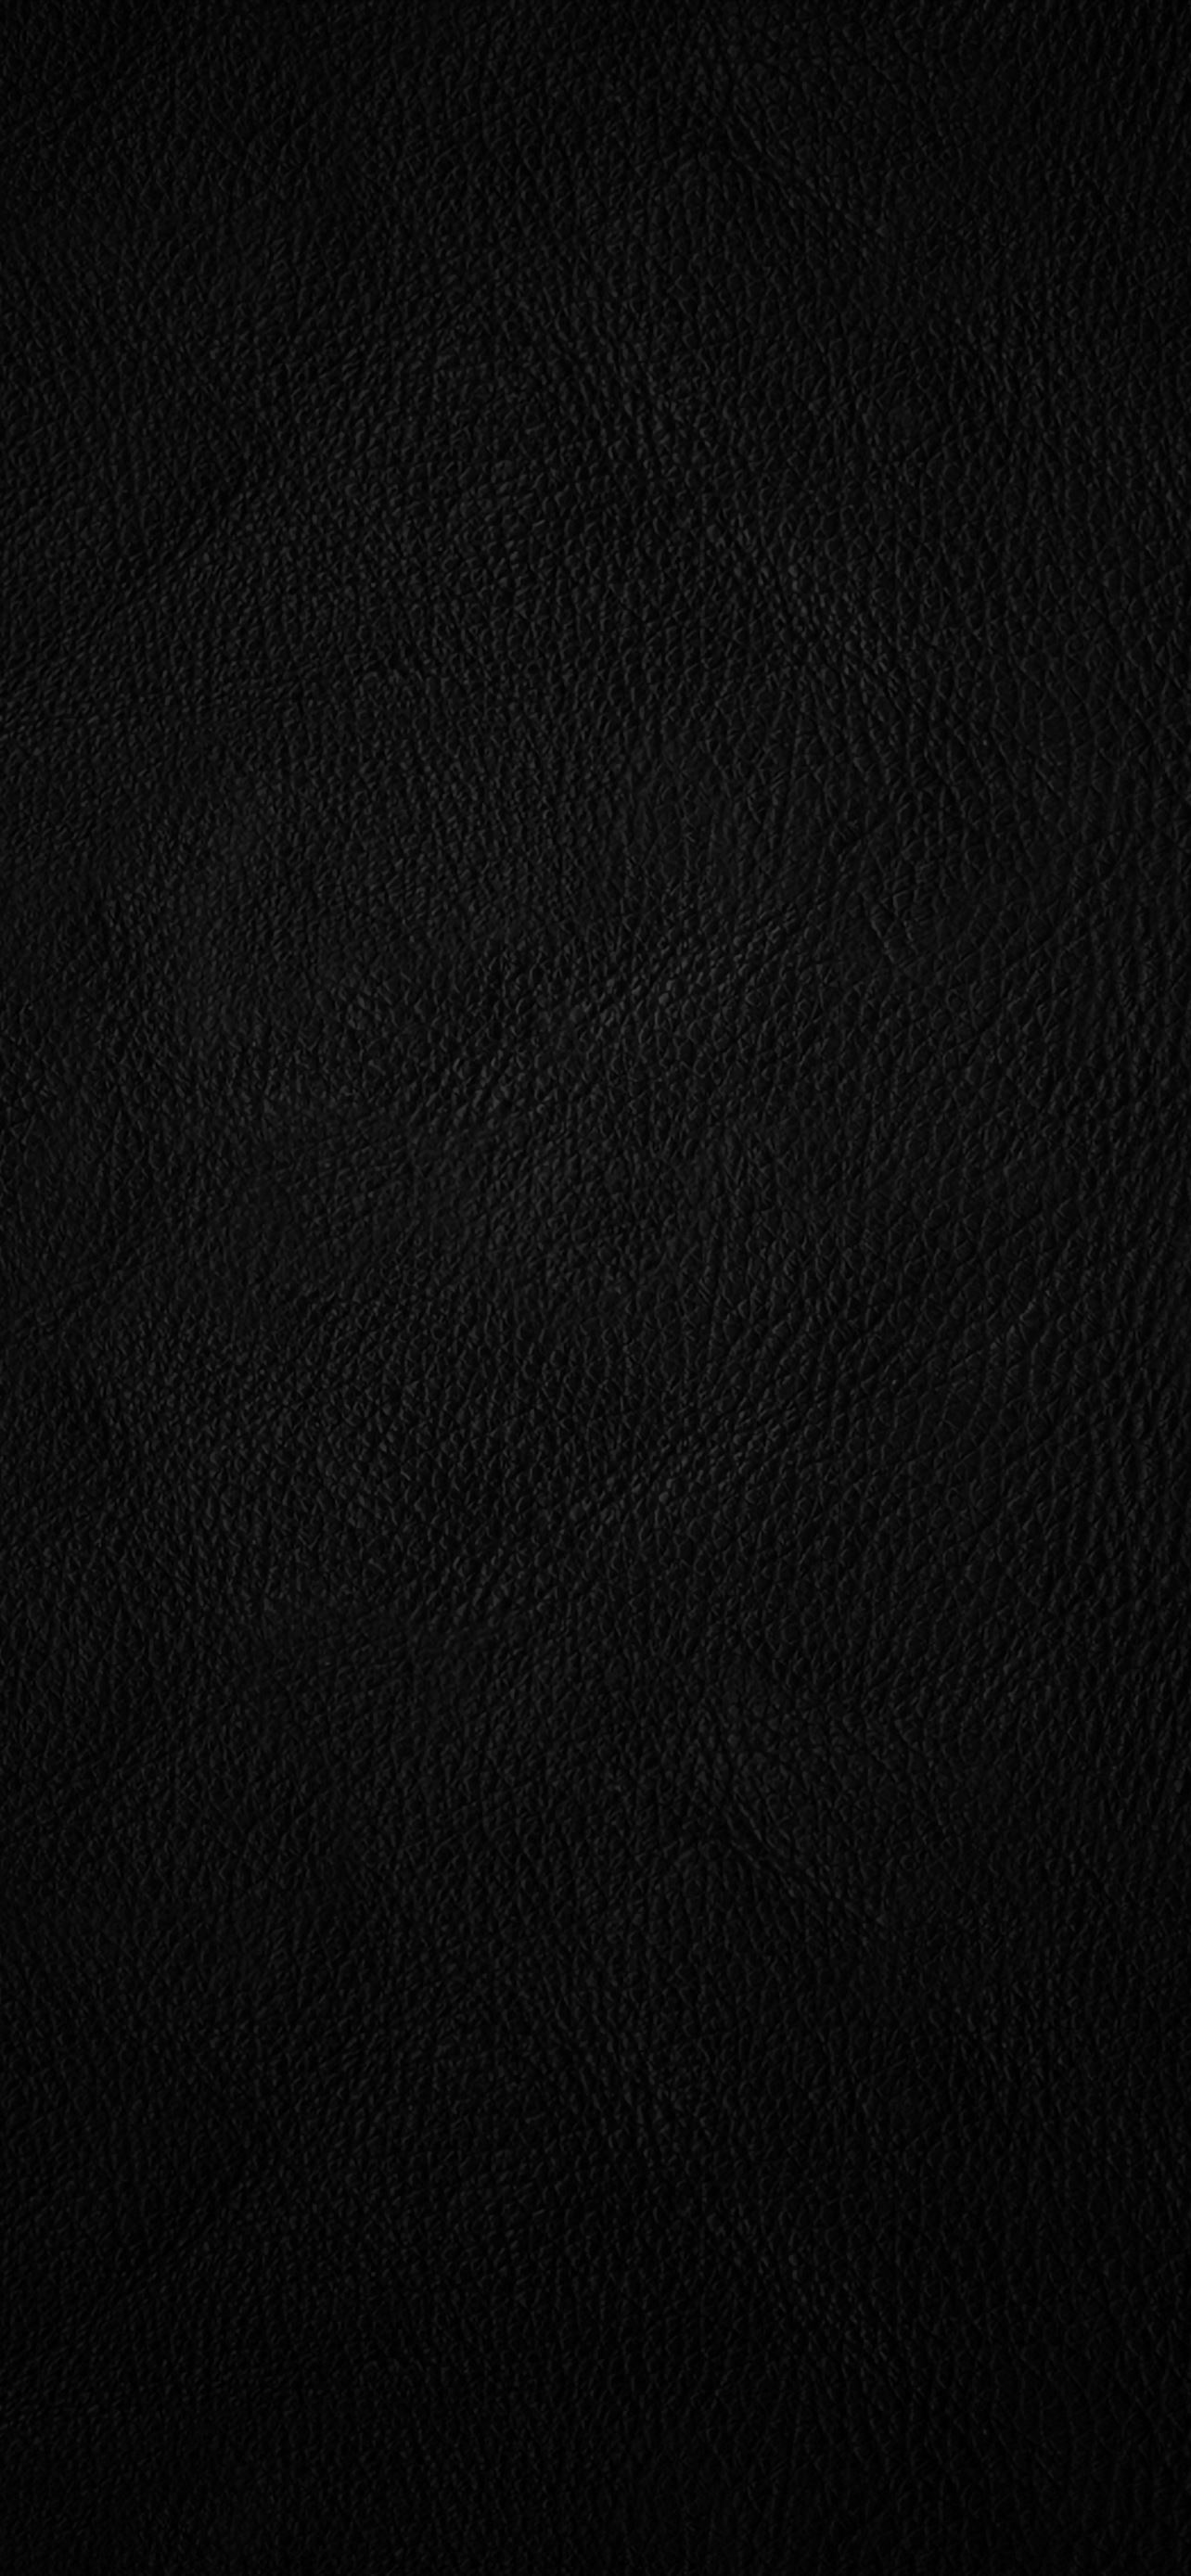 Black leather iPhone Wallpaper Free Download